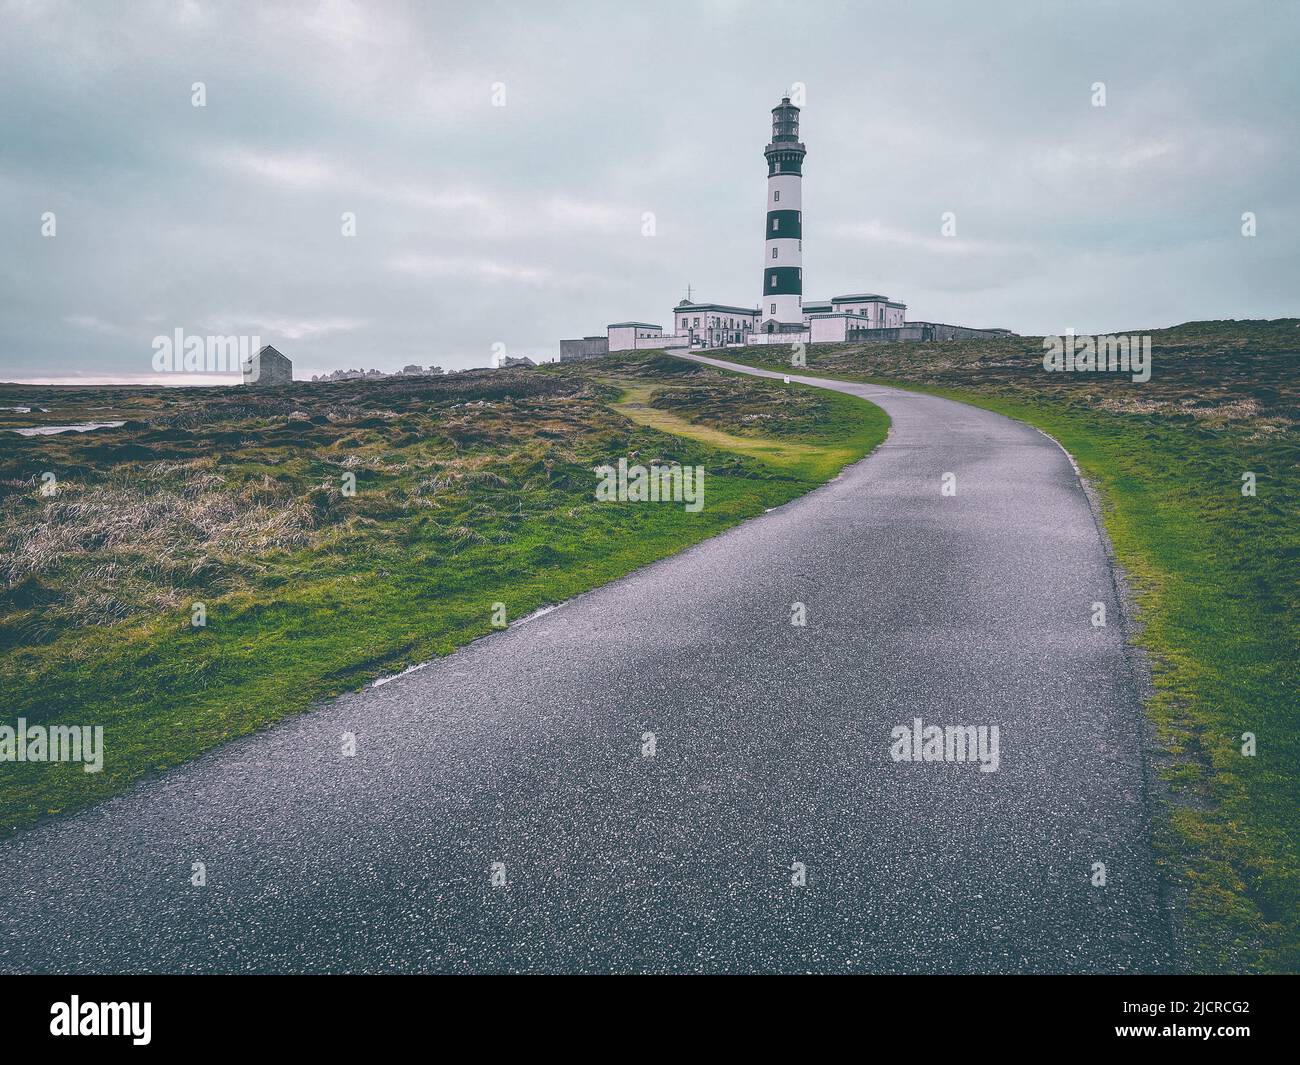 Ushan countryside scenery with Creach lighthouse road, Brittany, France Stock Photo